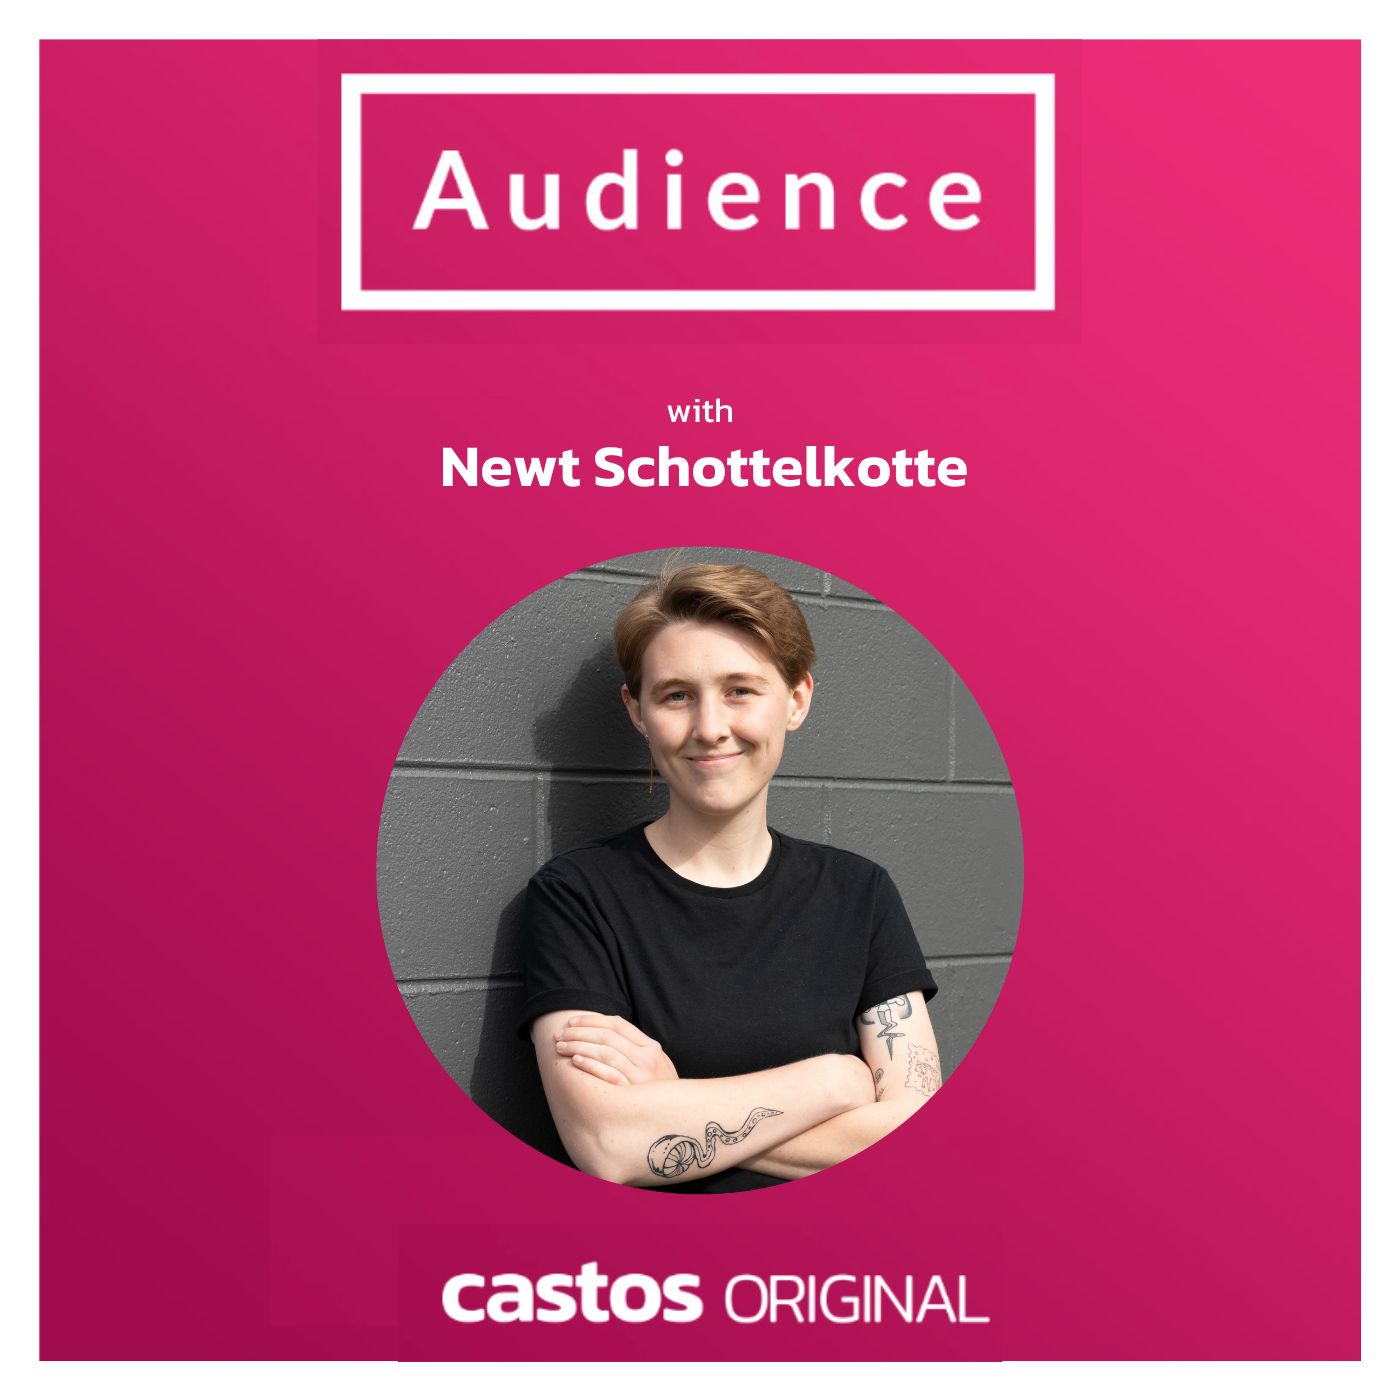 When Passion Meets Profession: How to fund a Project with Newt Schottelkotte